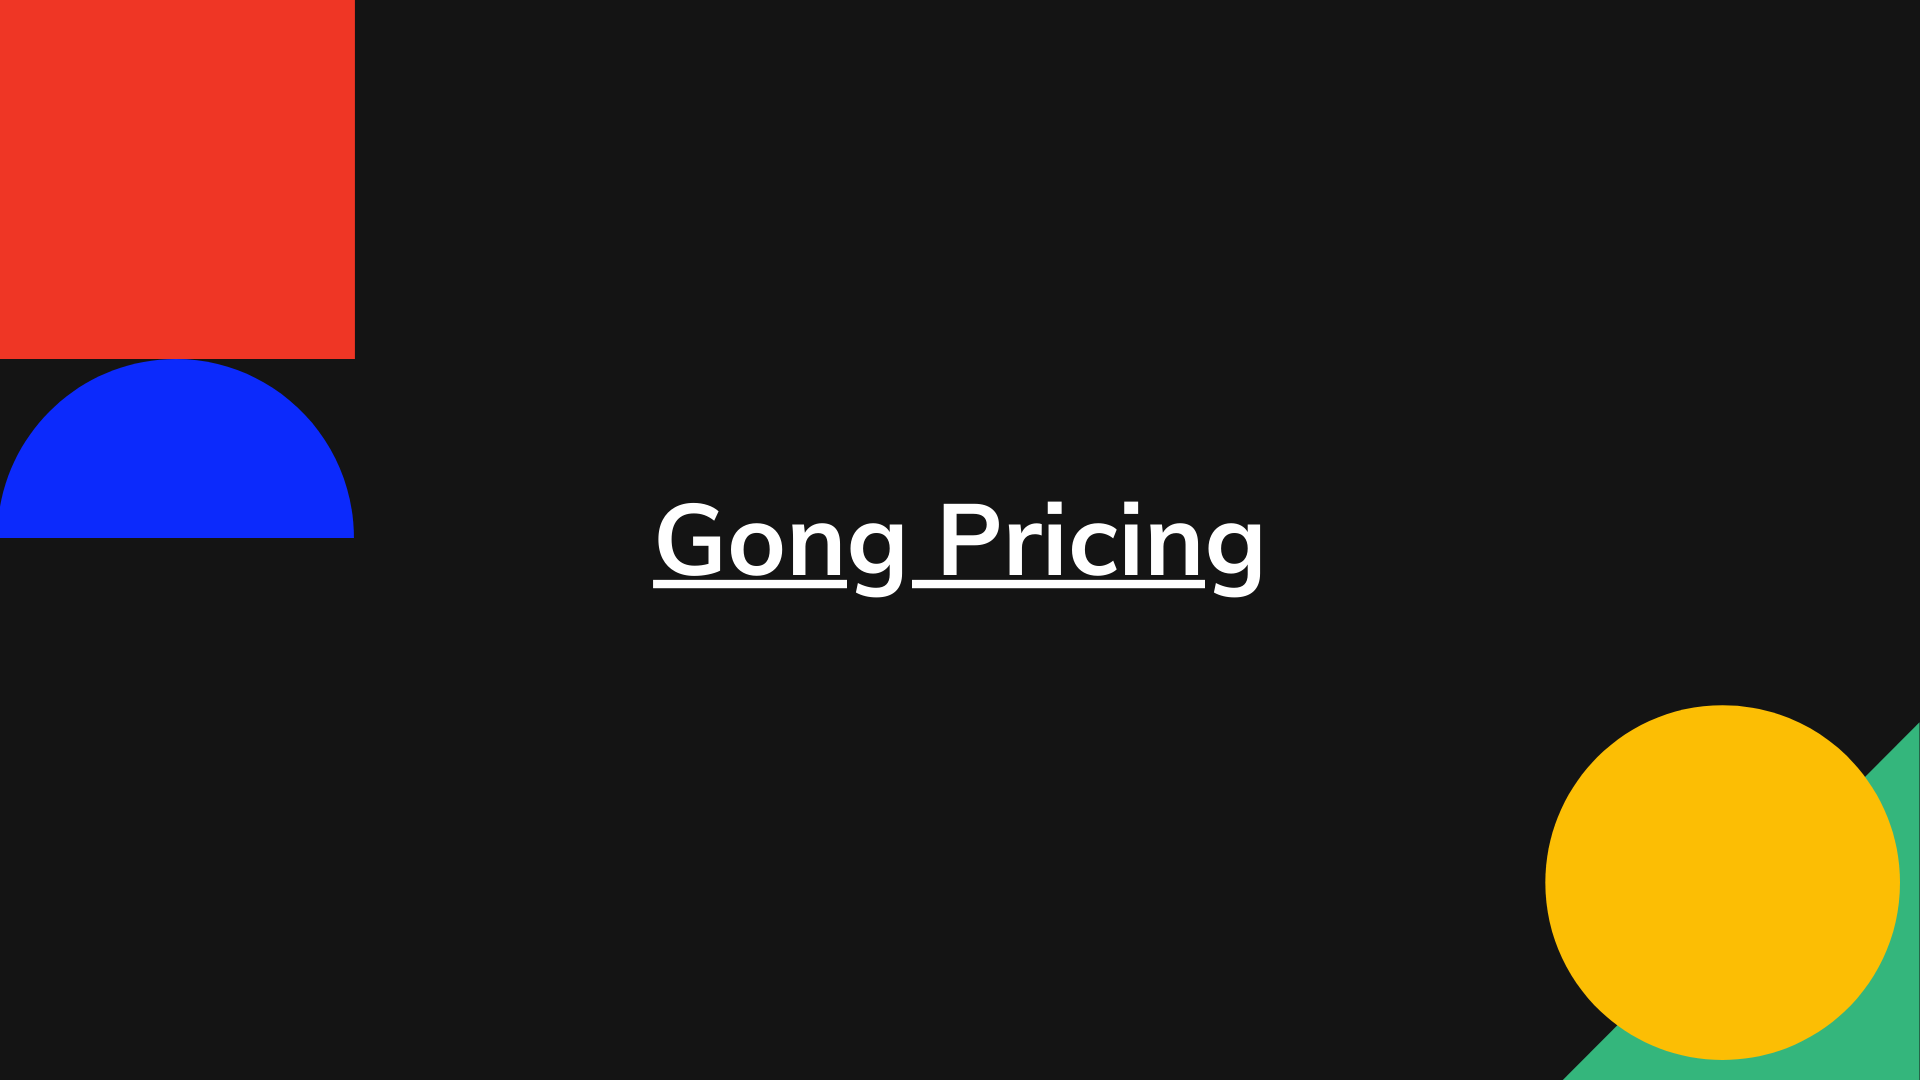 Gong Pricing